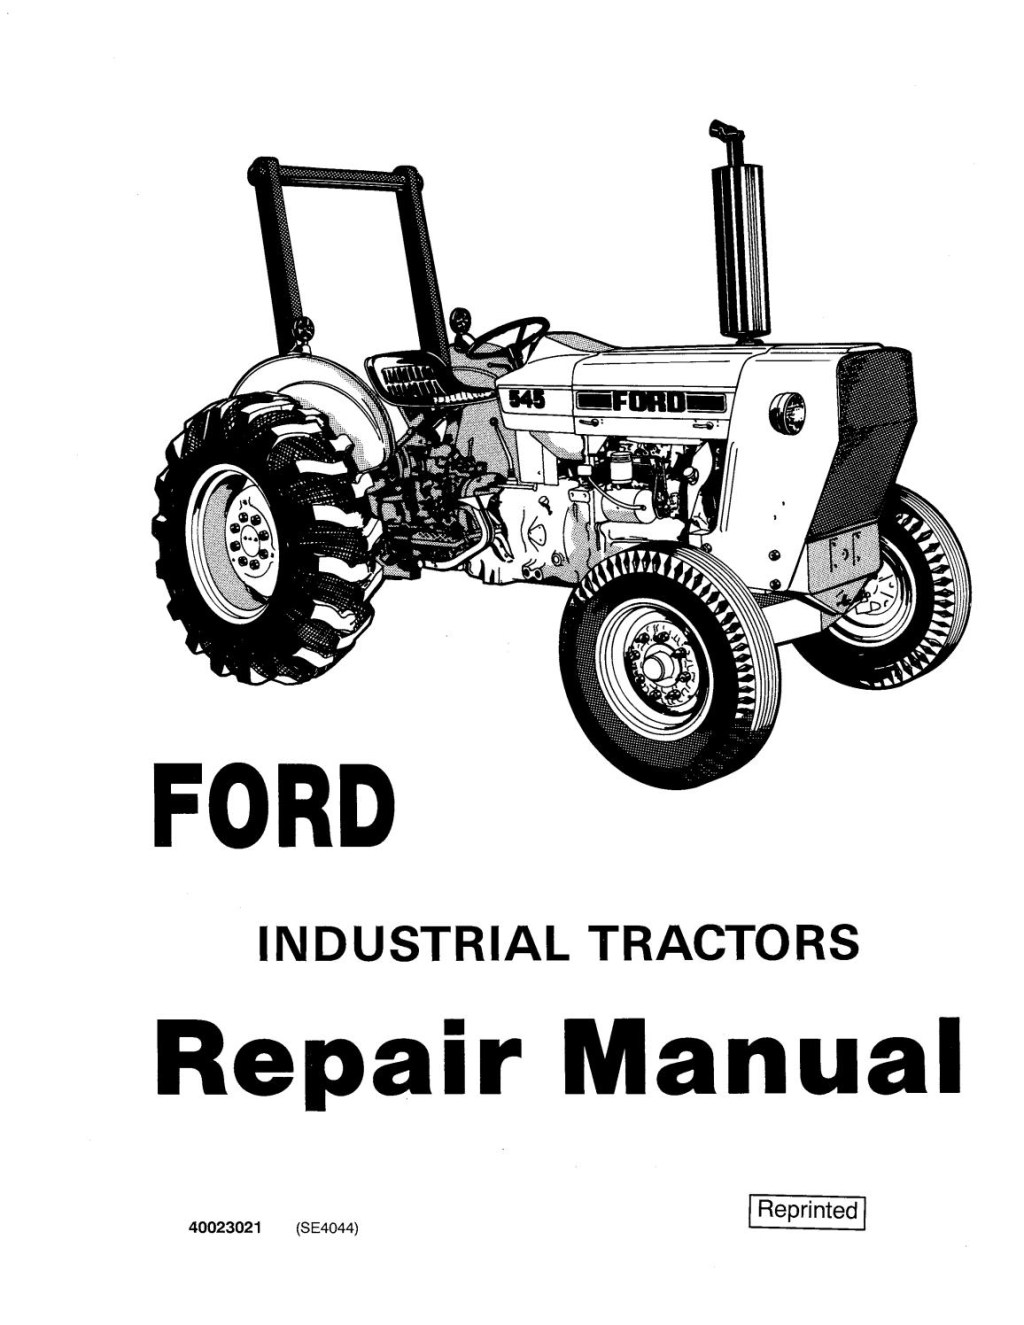 Picture of: Ford  Industrial Tractor Service Repair Manual by chonggan